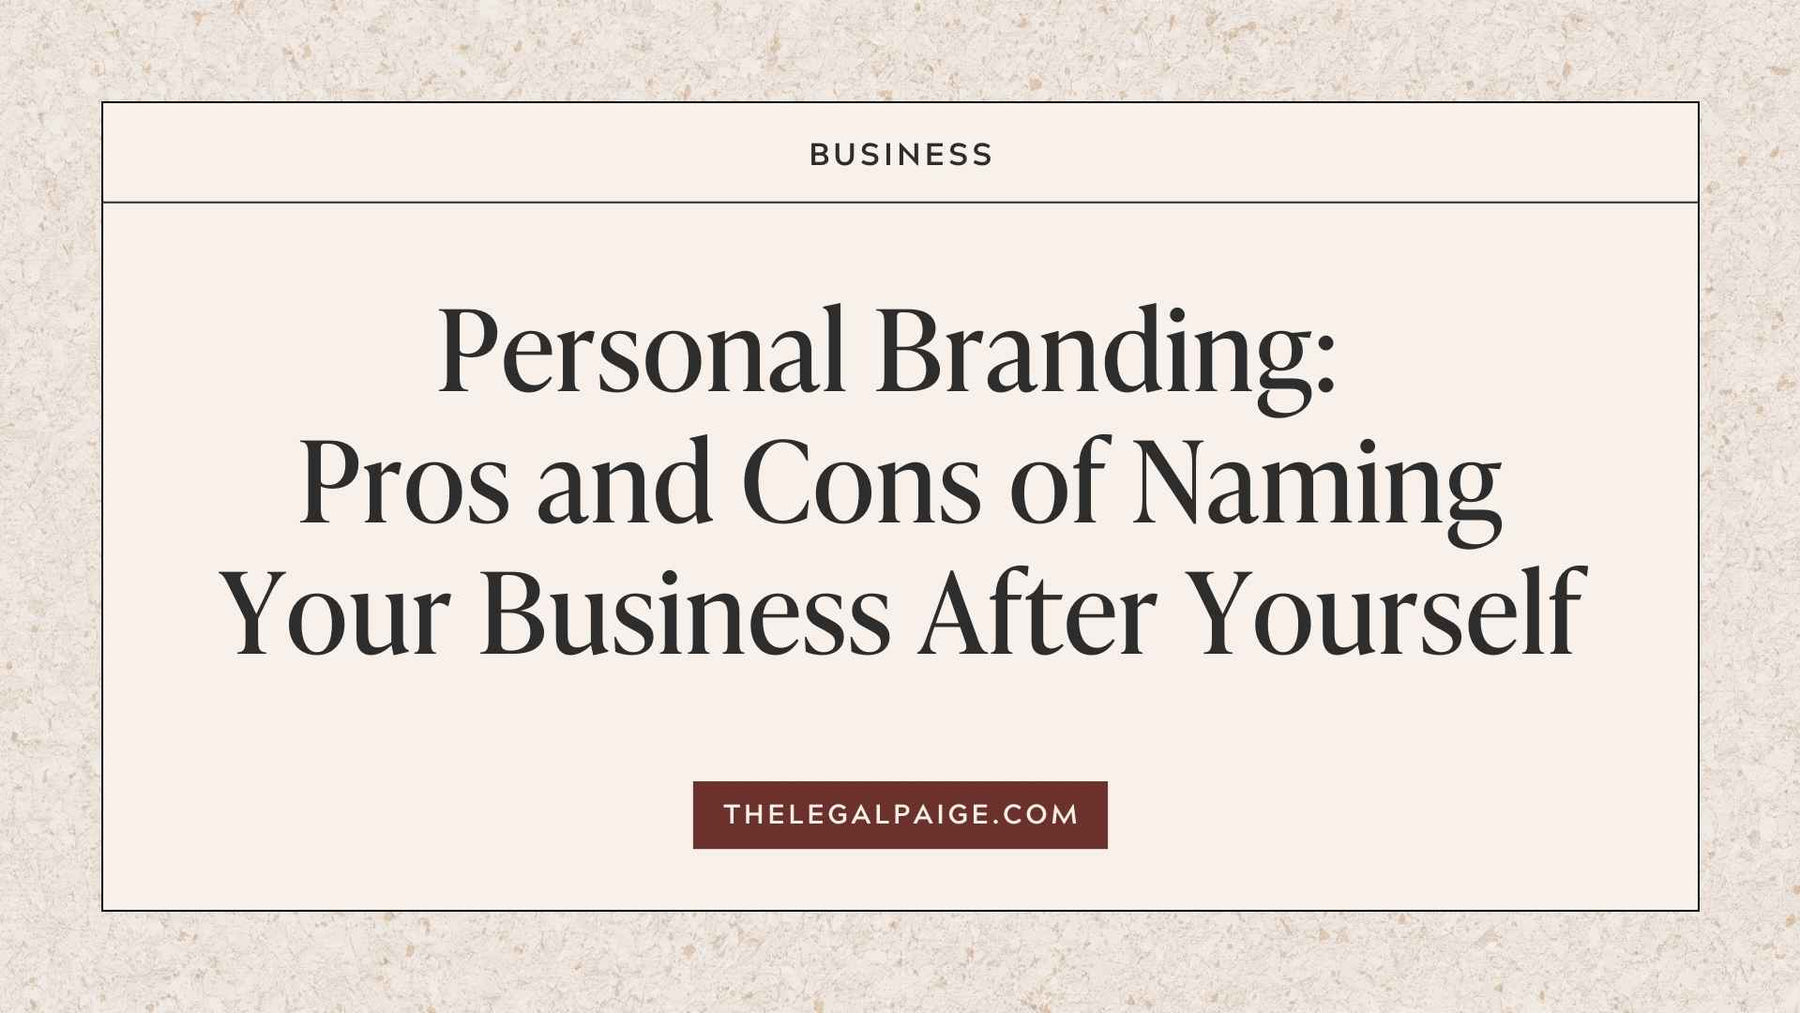 Personal Branding: Pros and Cons of Naming Your Business After Yourself